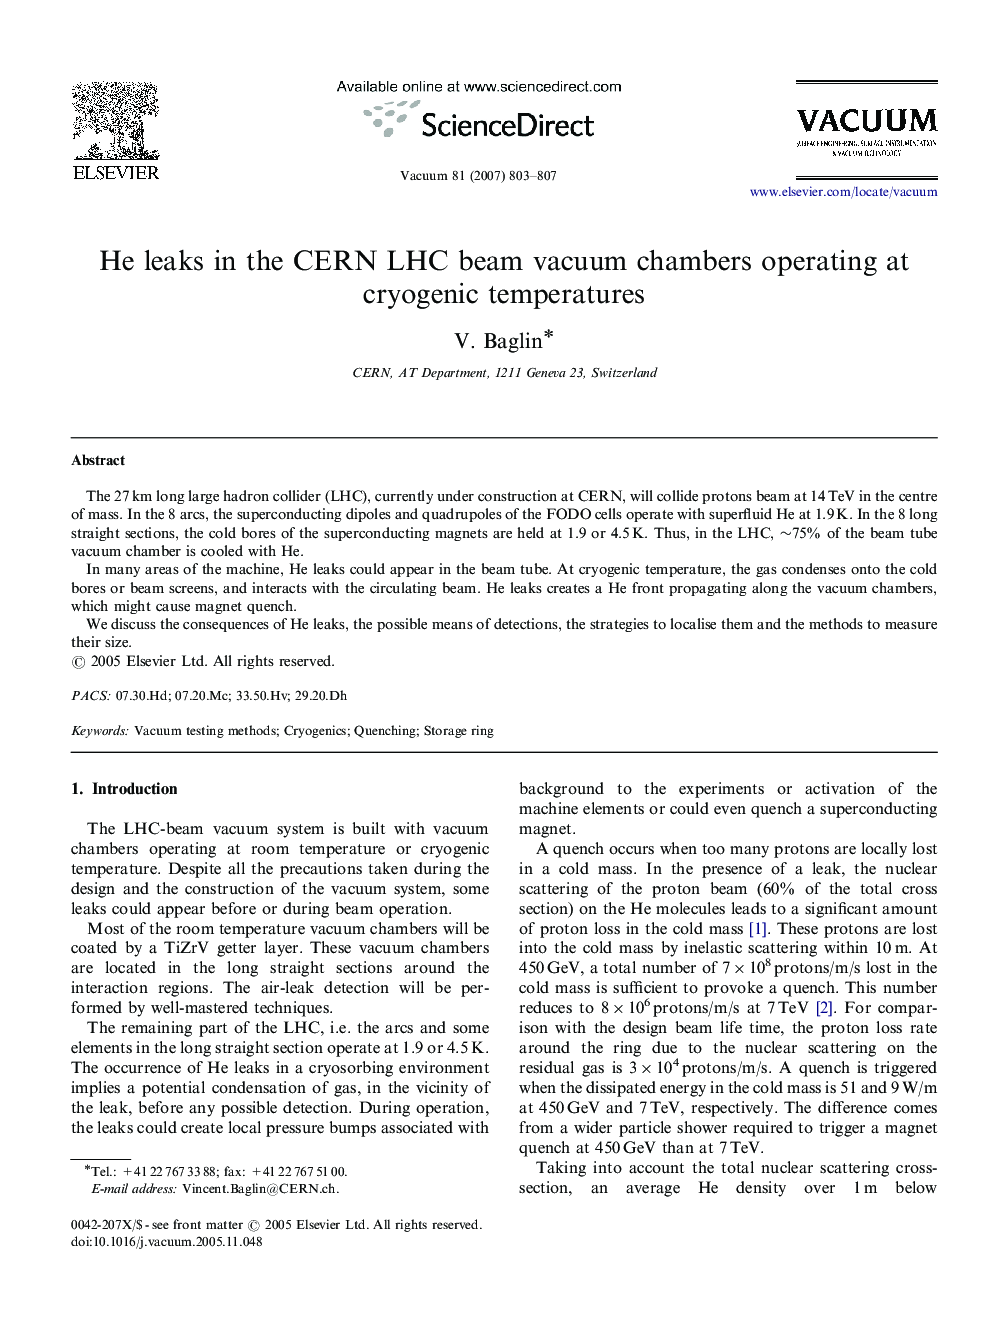 He leaks in the CERN LHC beam vacuum chambers operating at cryogenic temperatures